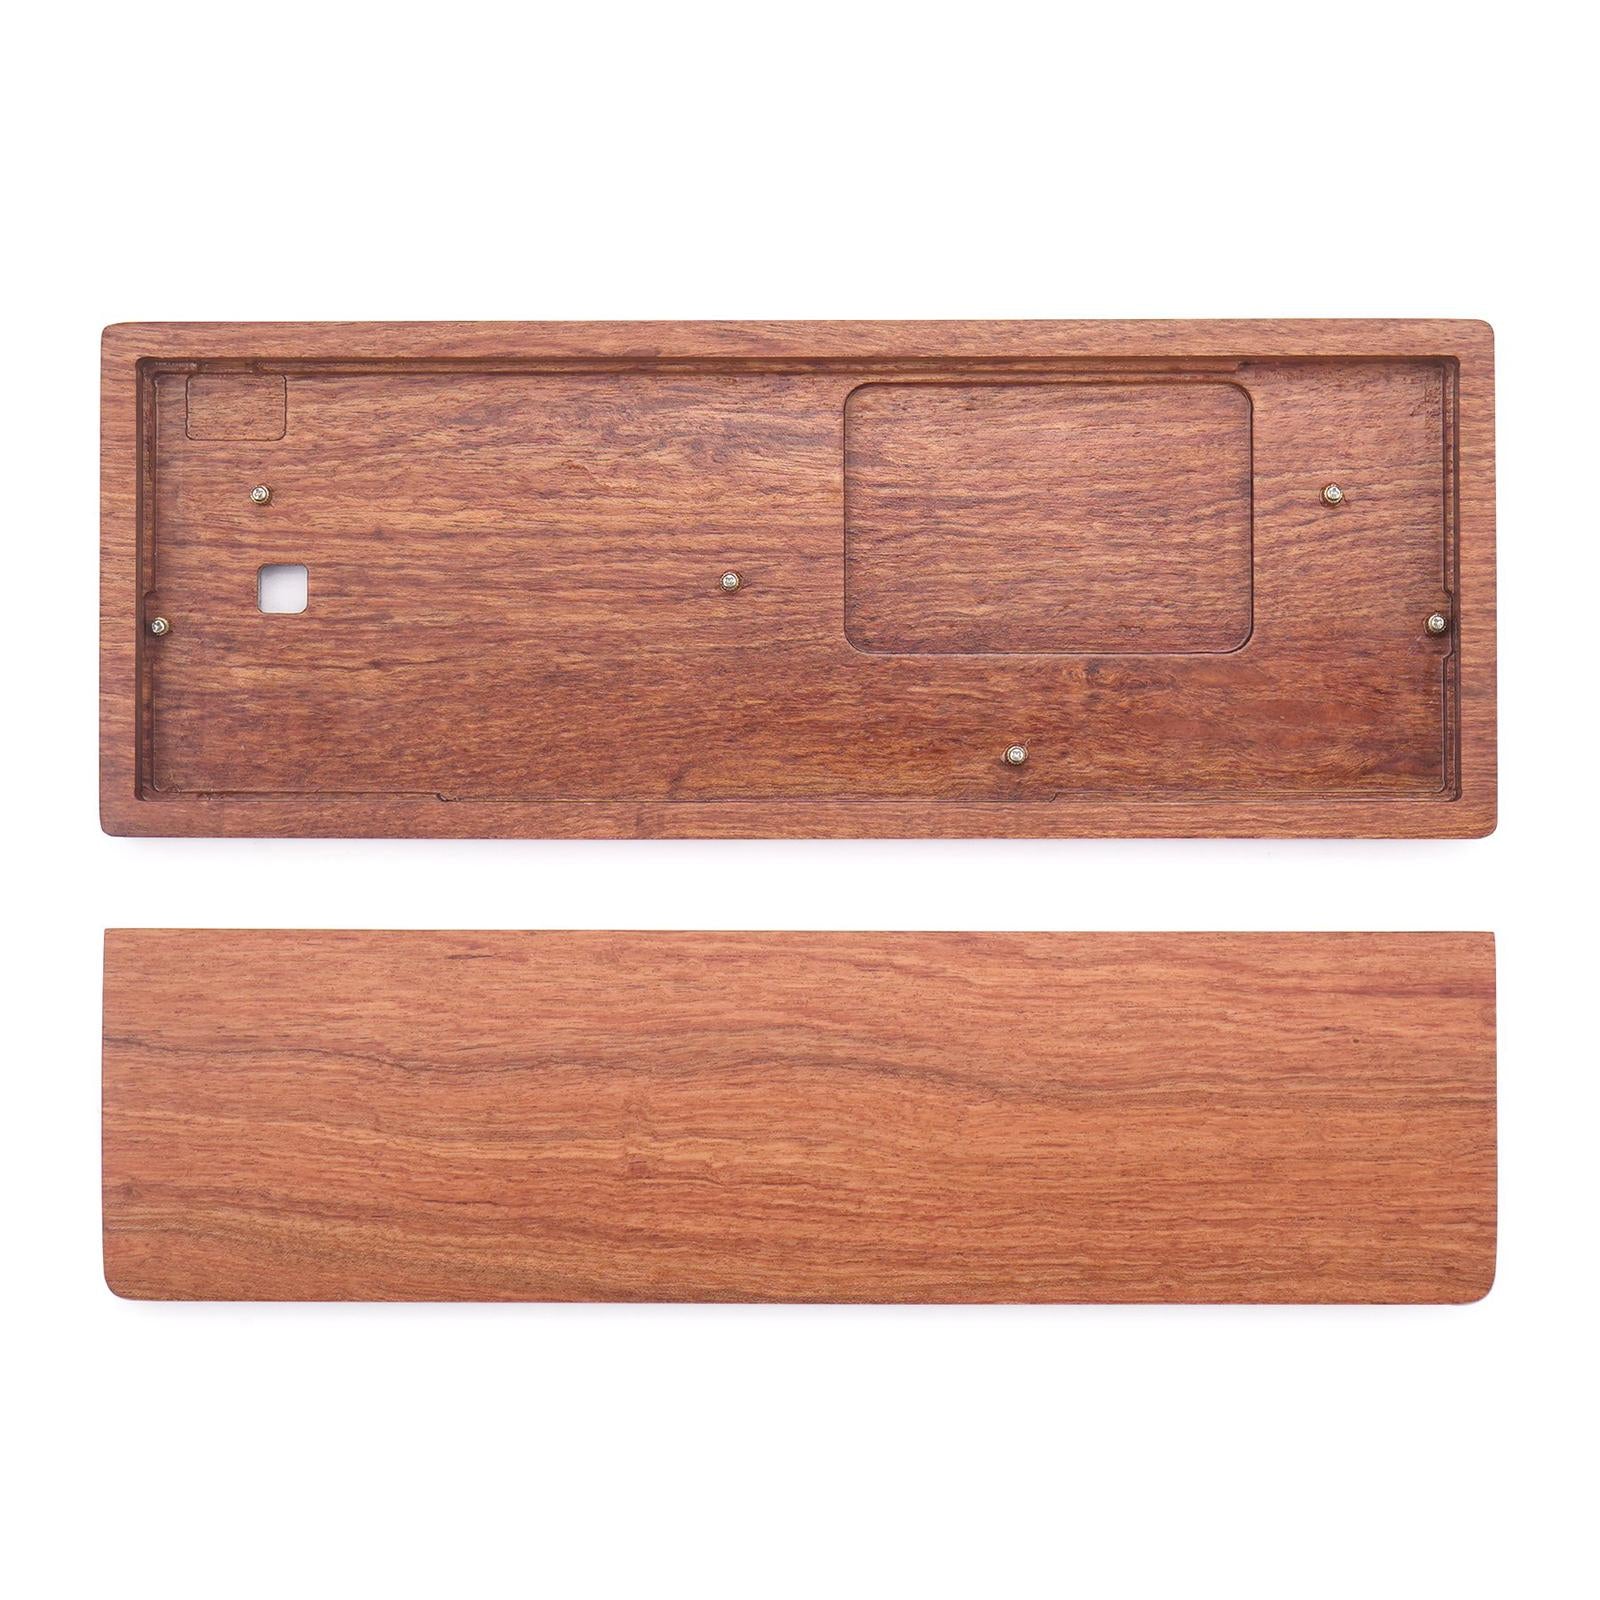 Wooden Case for GK61X GK61XS GK64X Mechanical Keyboard Rosewood Wirst Rest